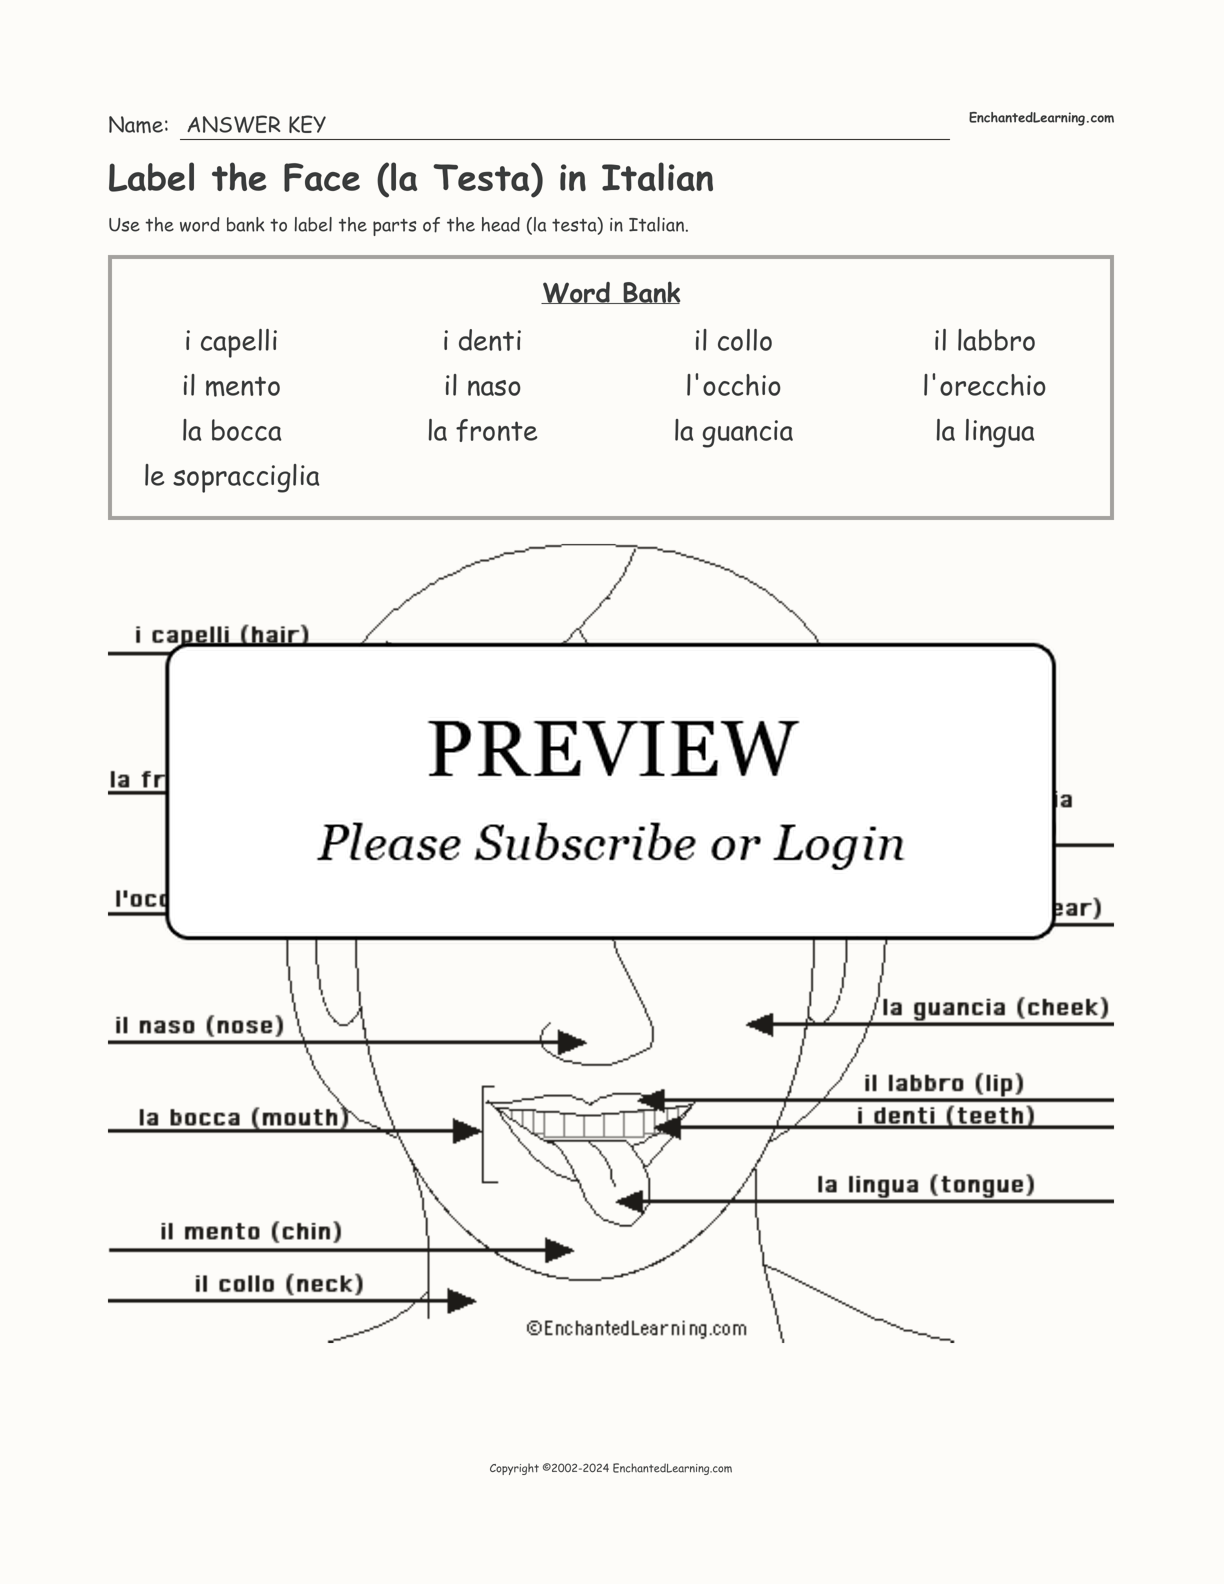 Label the Face (la Testa) in Italian interactive worksheet page 2